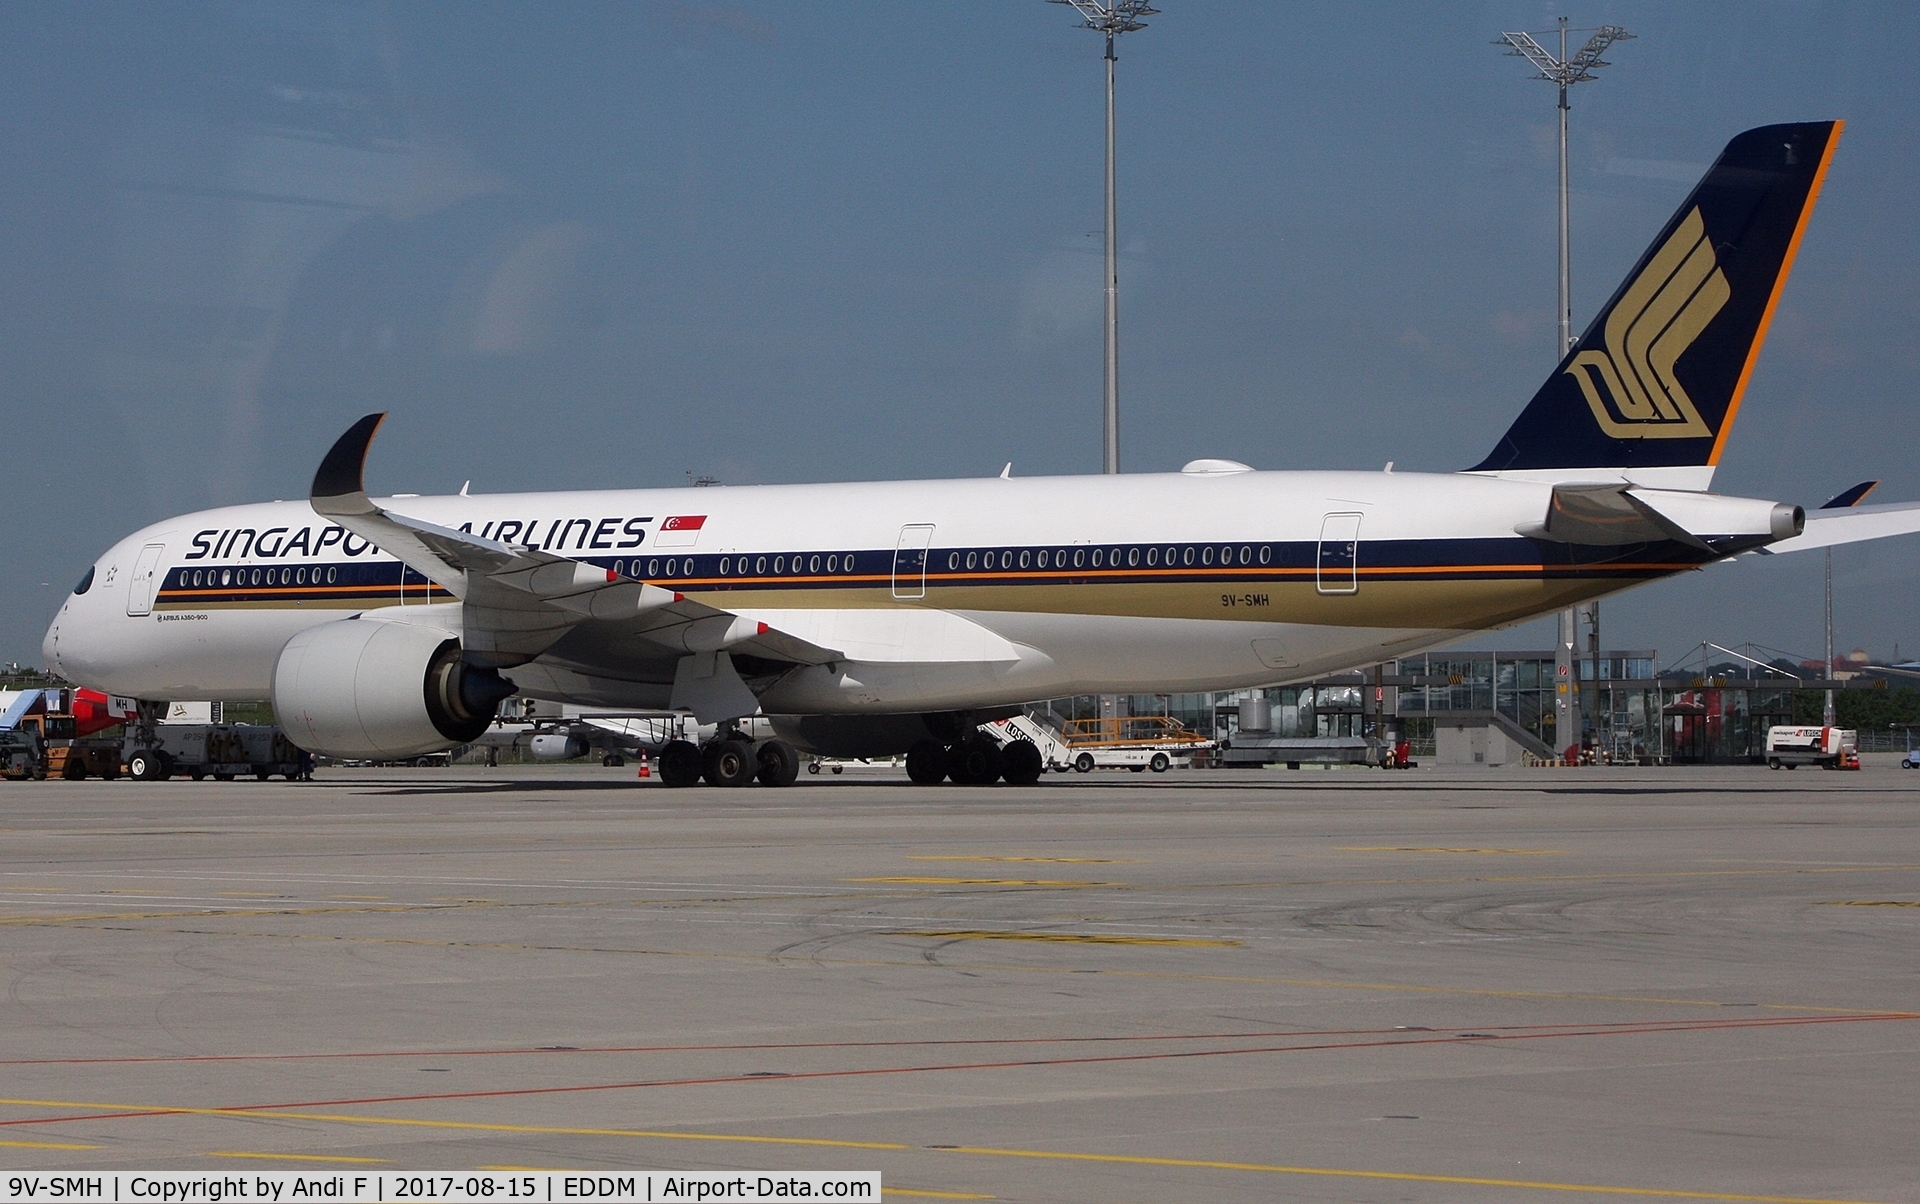 9V-SMH, 2016 Airbus A350-941 C/N 068, Singapore Airlines Airbus A350-900